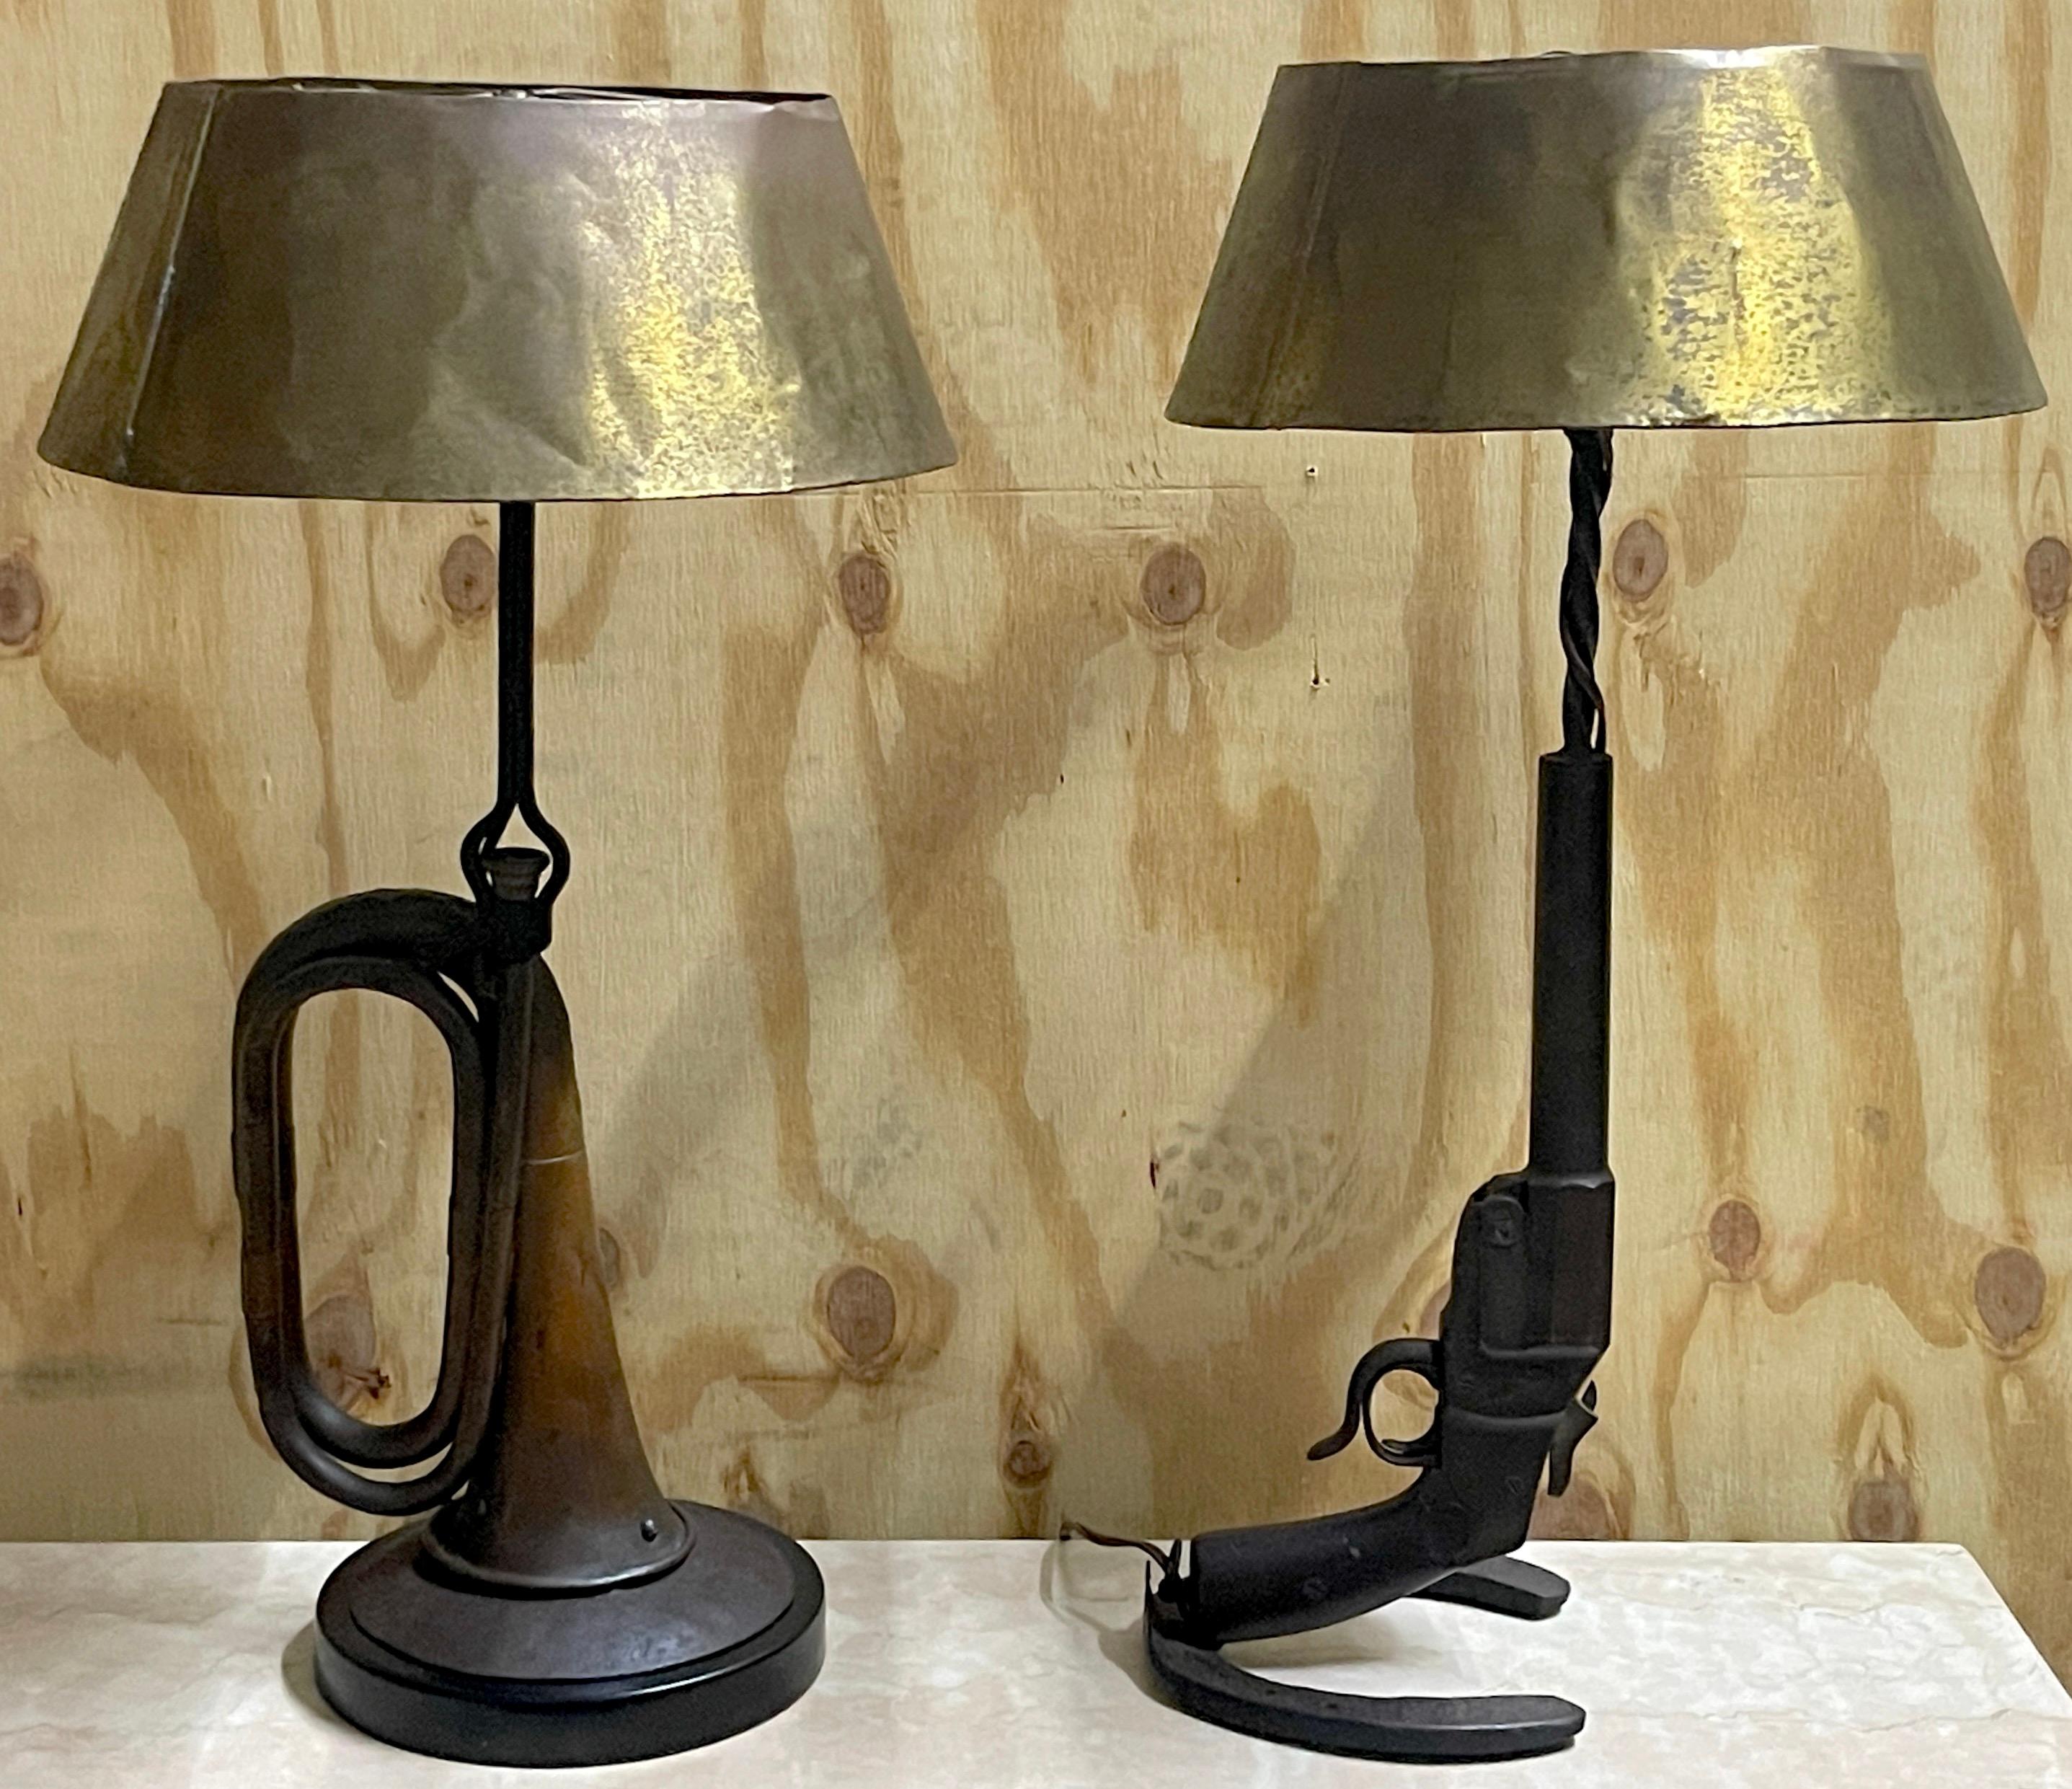 Pair of WWI Military Trench Art Memento Lamps with Bouillotte Style Shades 
'Beauty of The Battlefield' 
A amazing repurposed assemblage of WWI authentic tactical artifacts, artisan made into a pair of lamps Circa 1920, Newly rewired, ready to